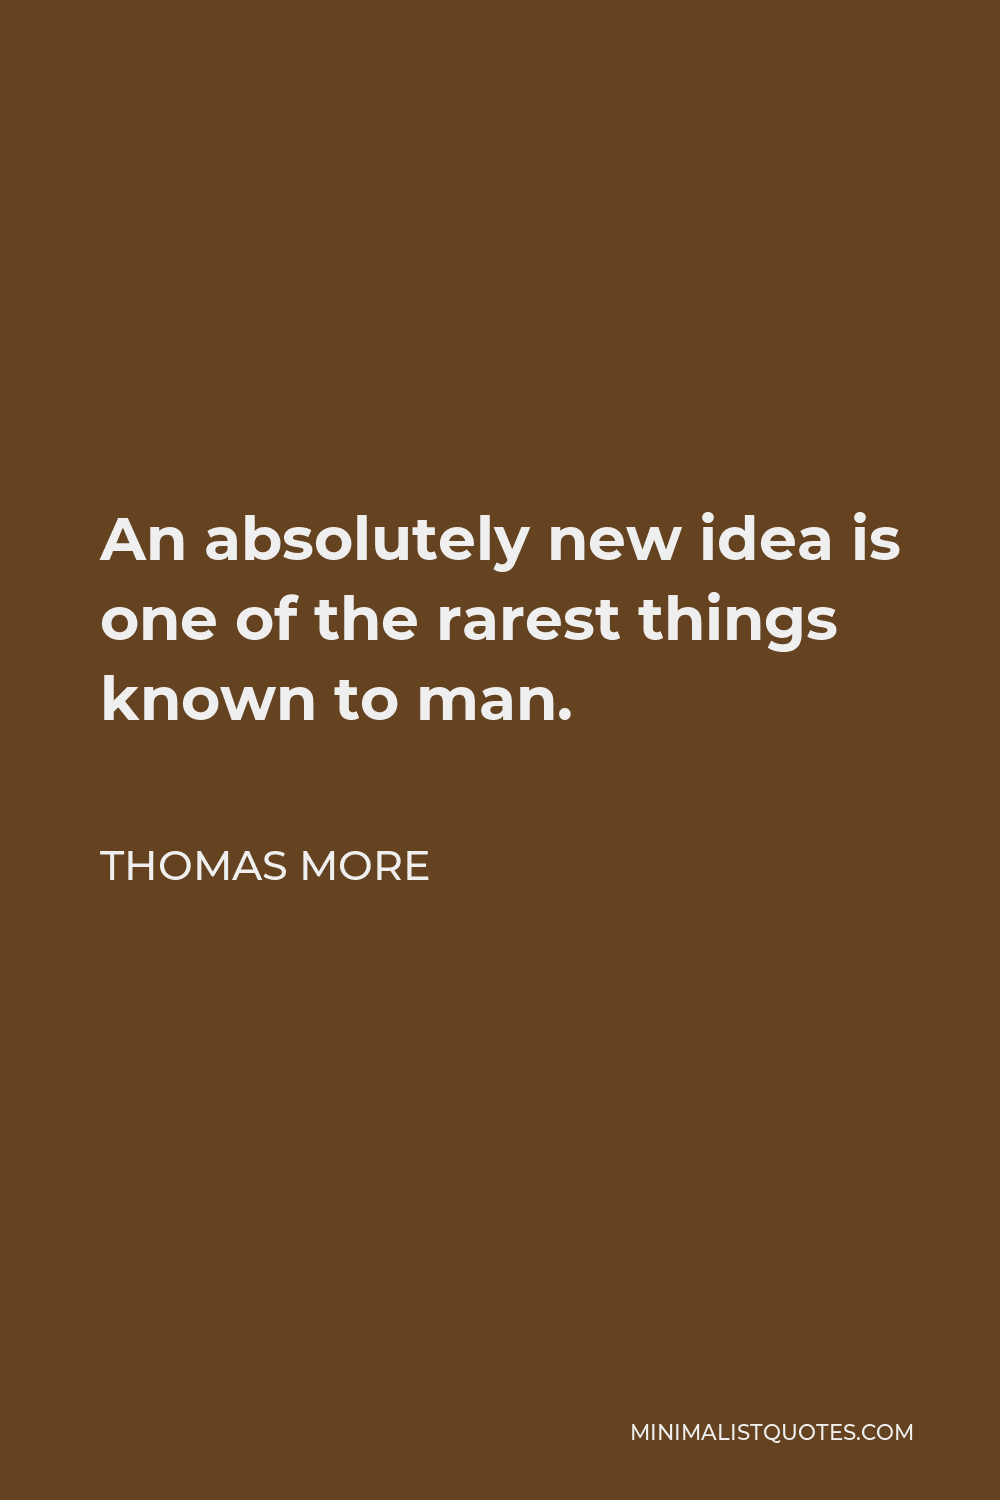 Thomas More Quote - An absolutely new idea is one of the rarest things known to man.